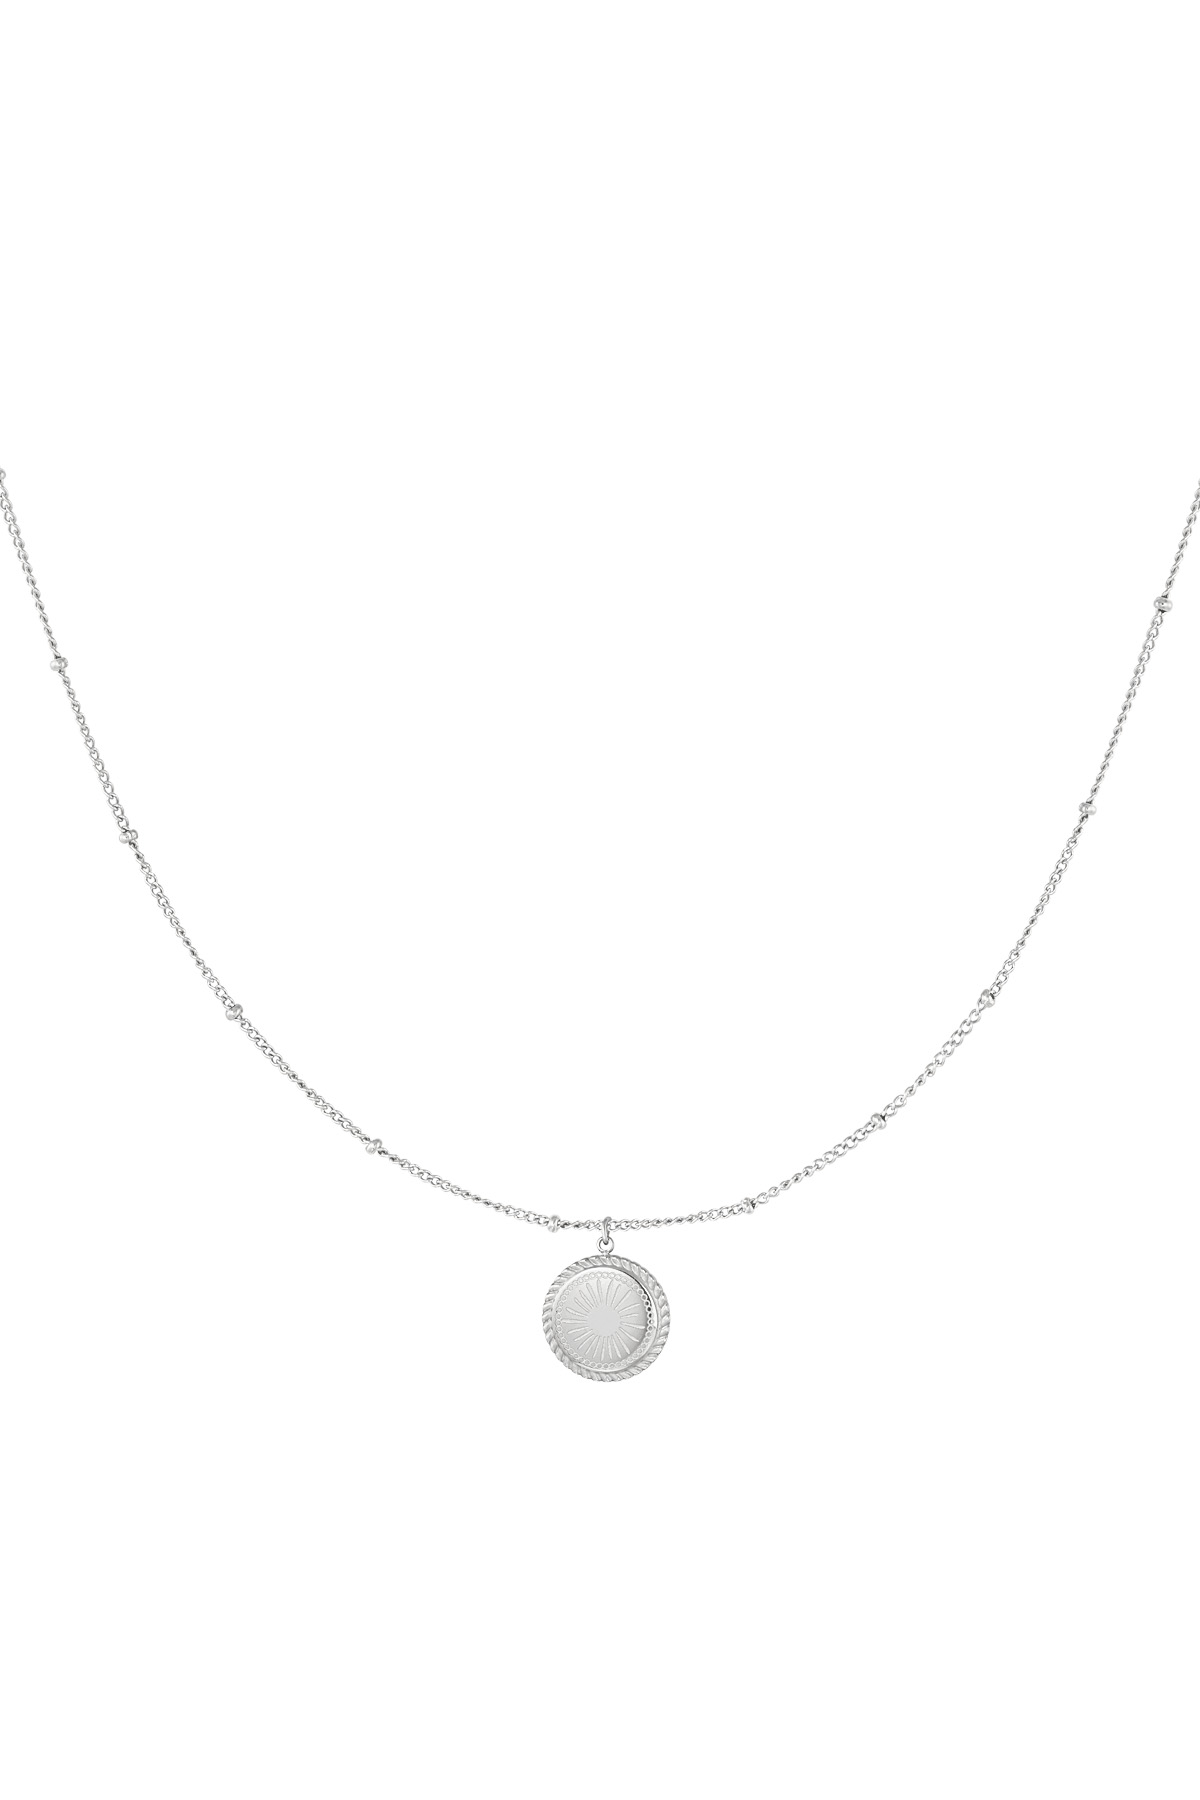 Ketting dubbele ronde coin - zilver h5 